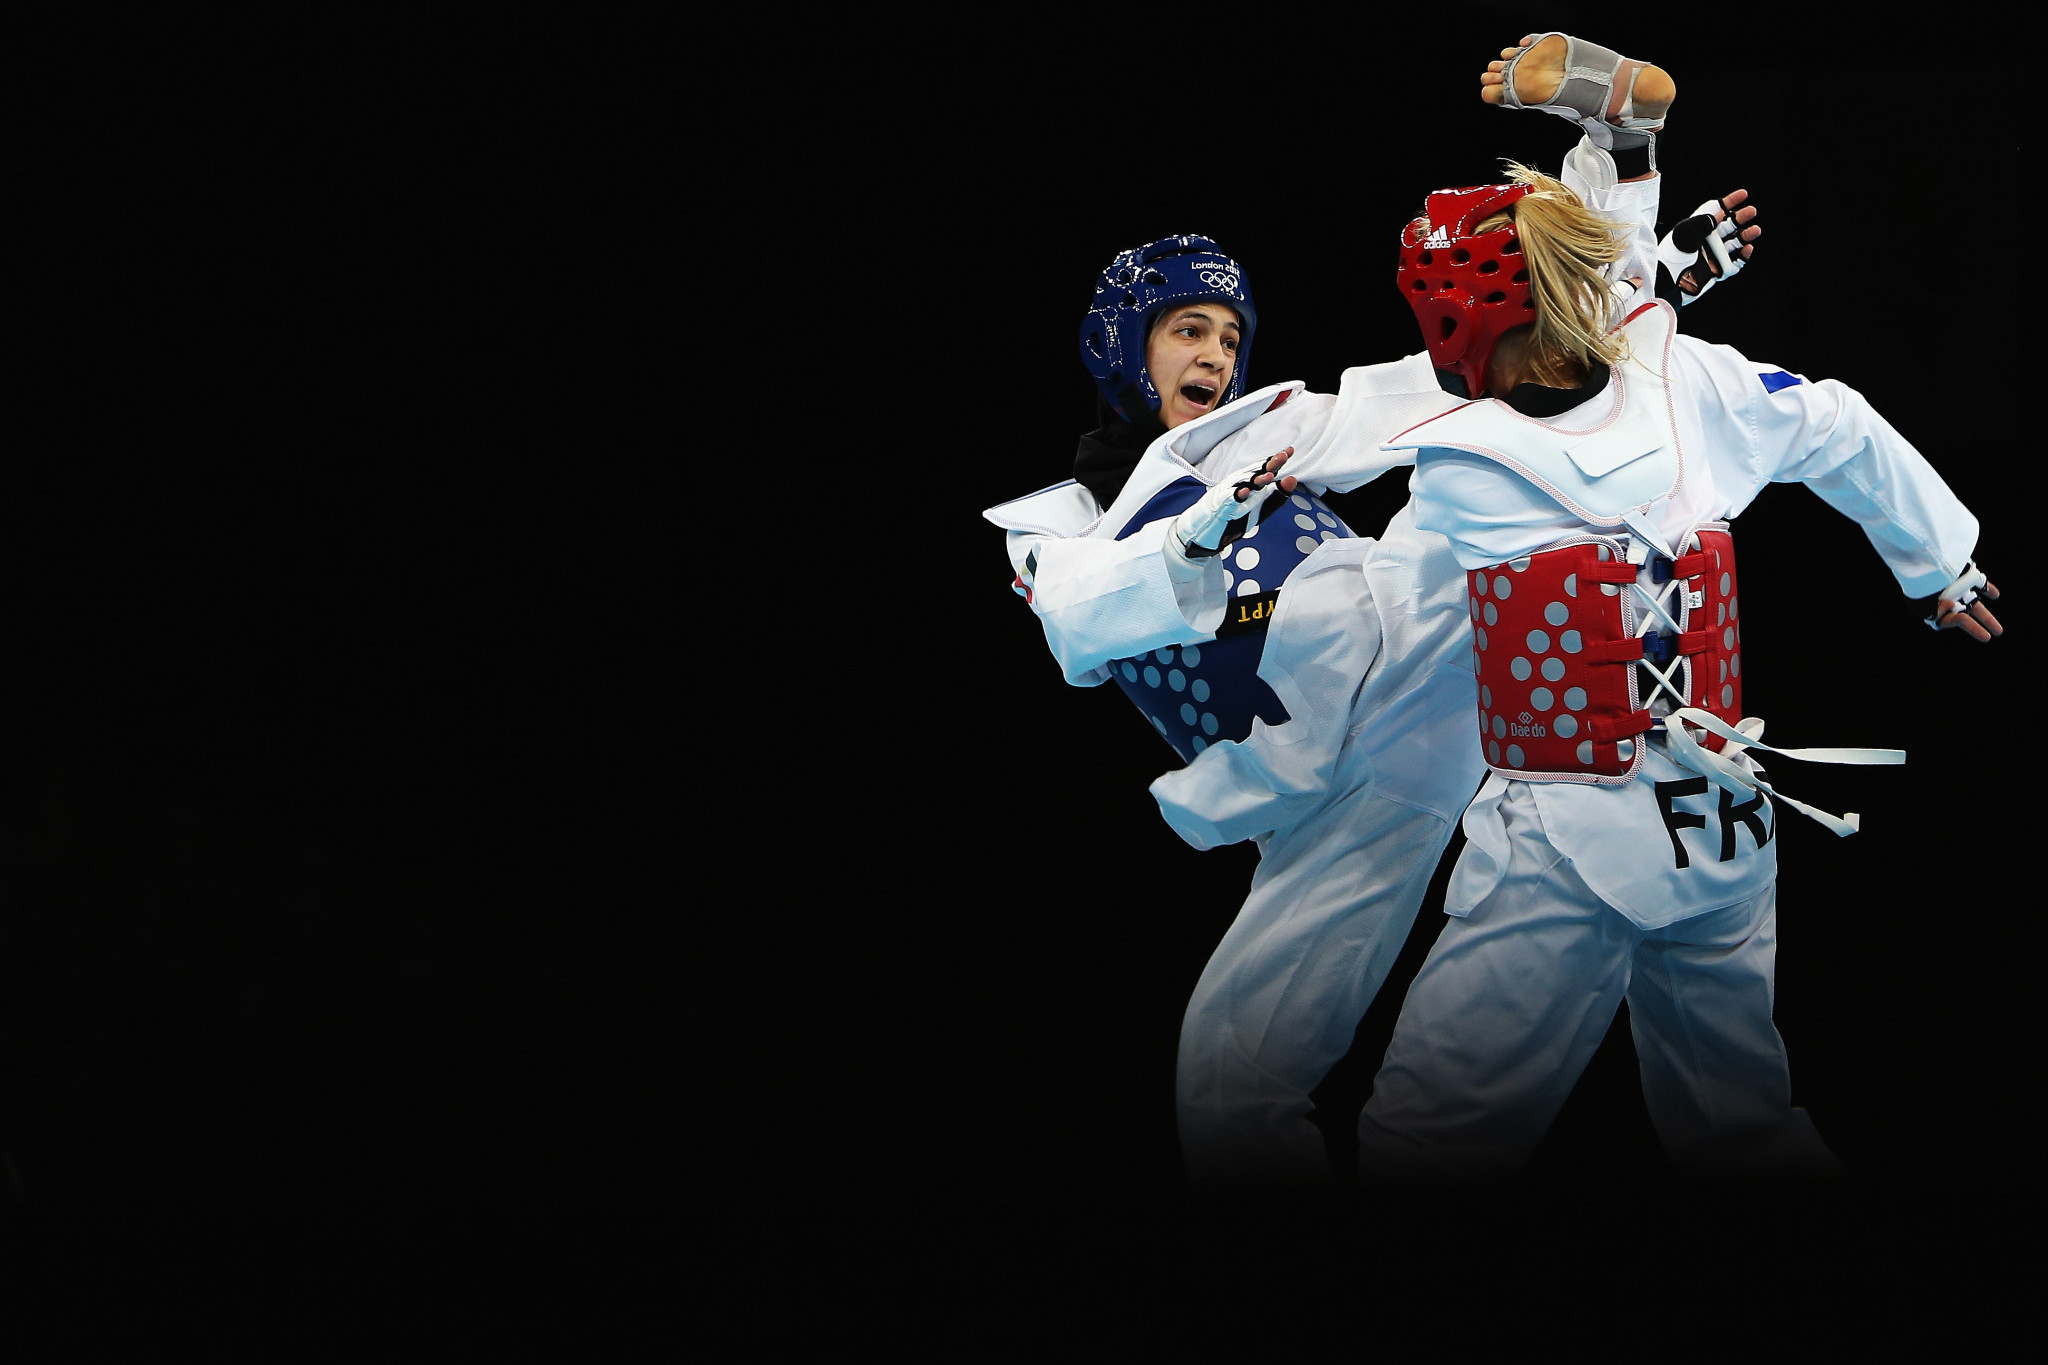 The Paris 2024 taekwondo venue will be named after Alice Milliat ©Getty Images